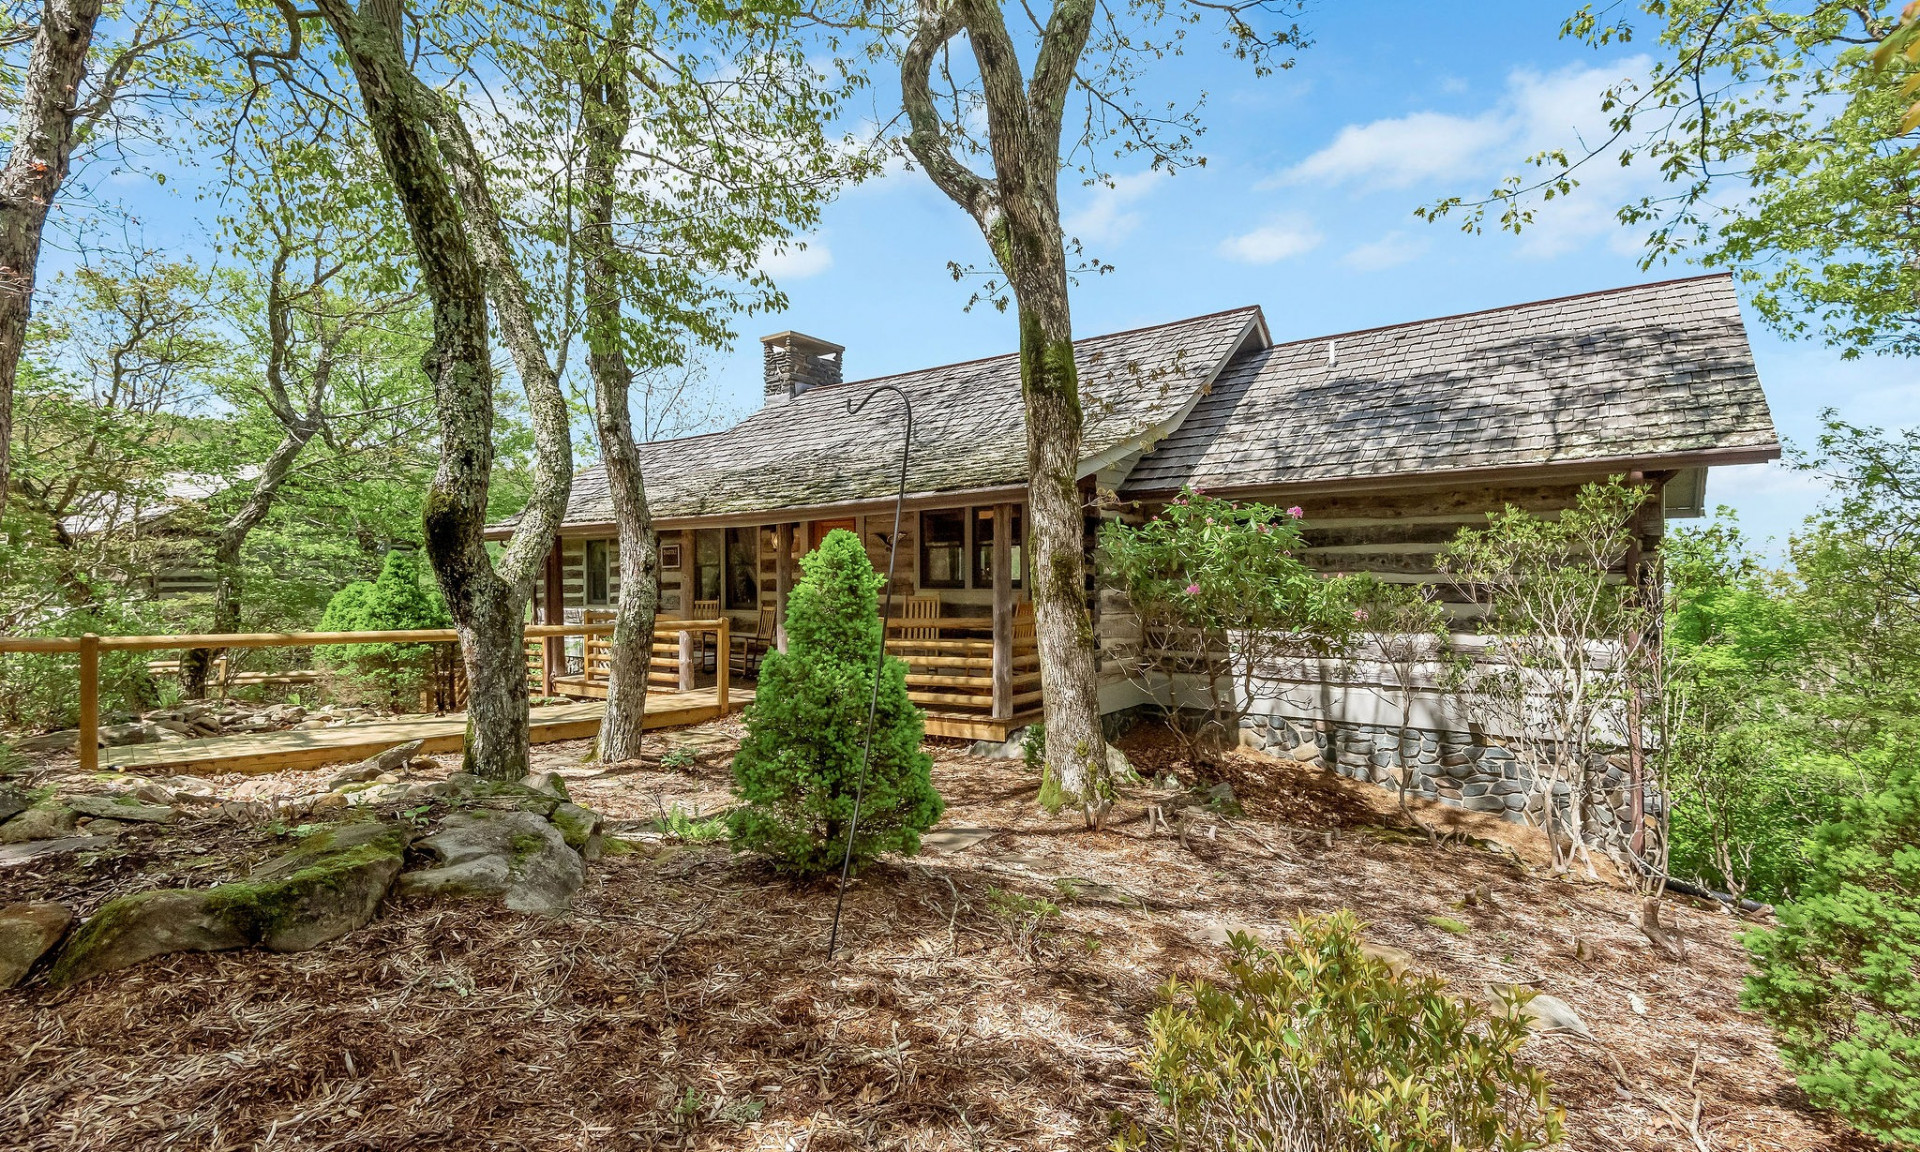 Welcome to Stonebridge - a unique community of antique log homes located in southern Ashe County, NC!